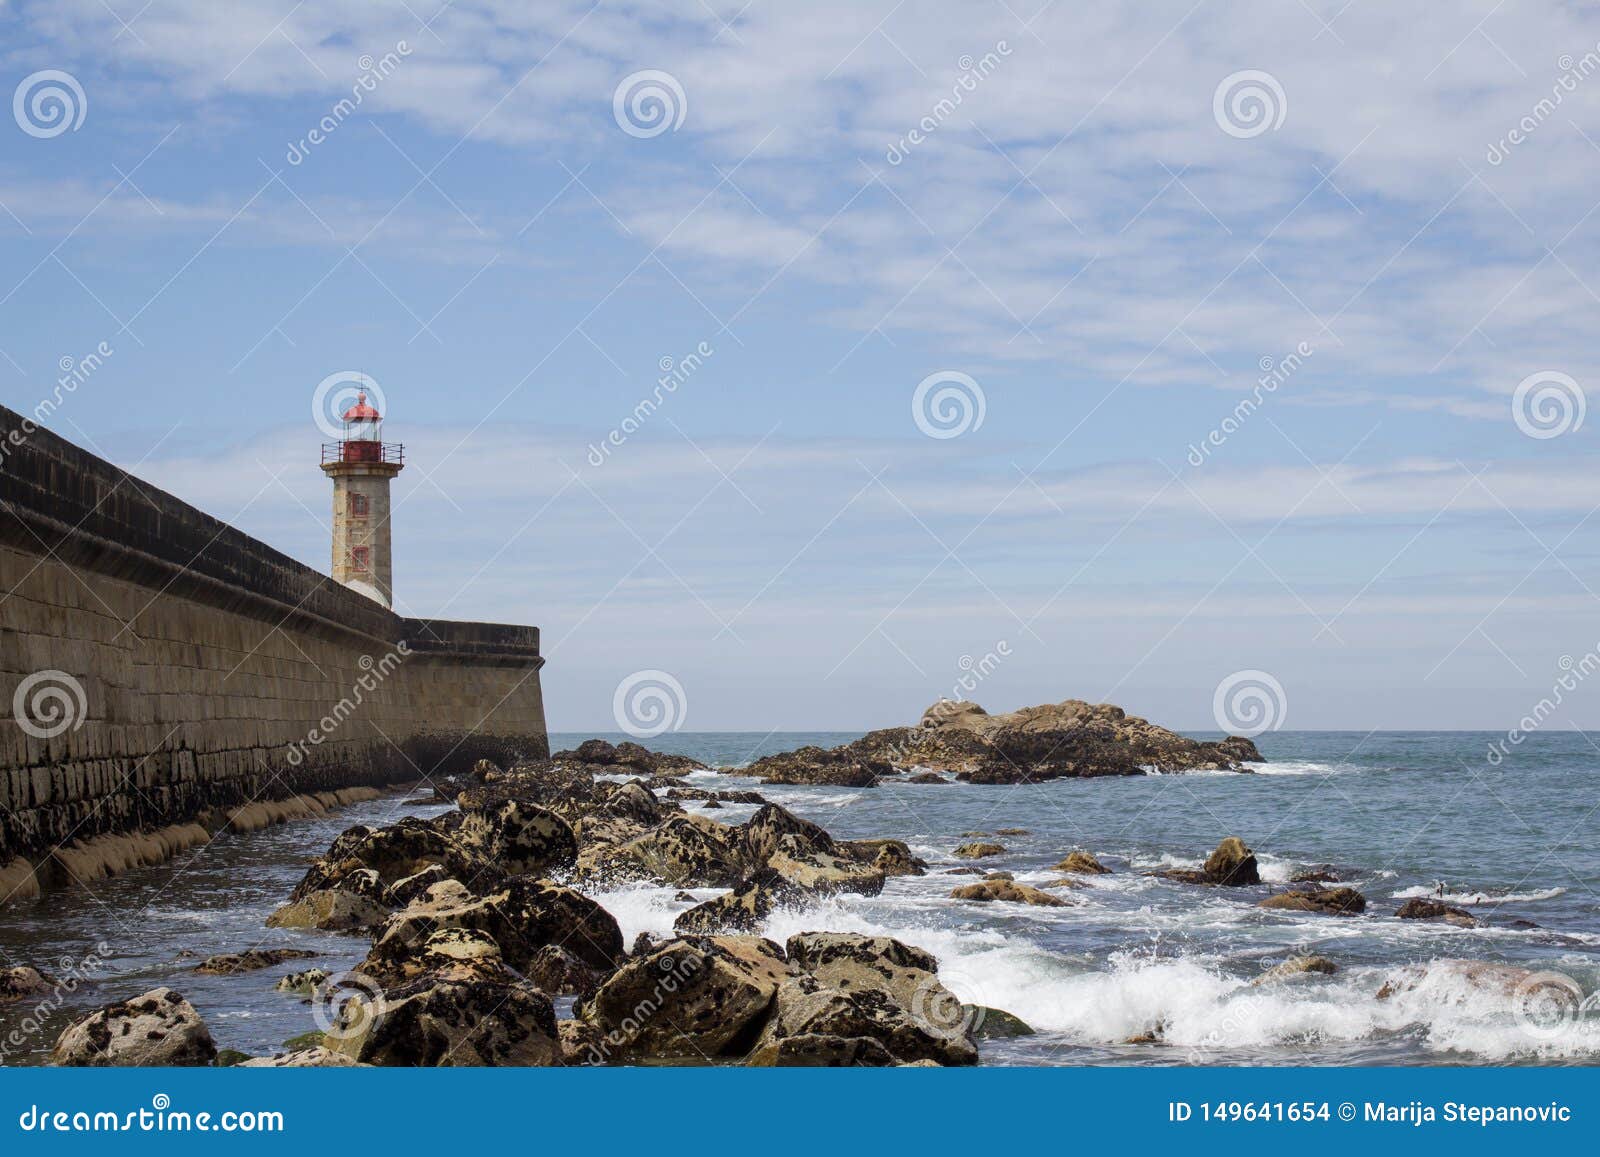 view from carneiro beach in porto to pier and lighthouse felgueiras